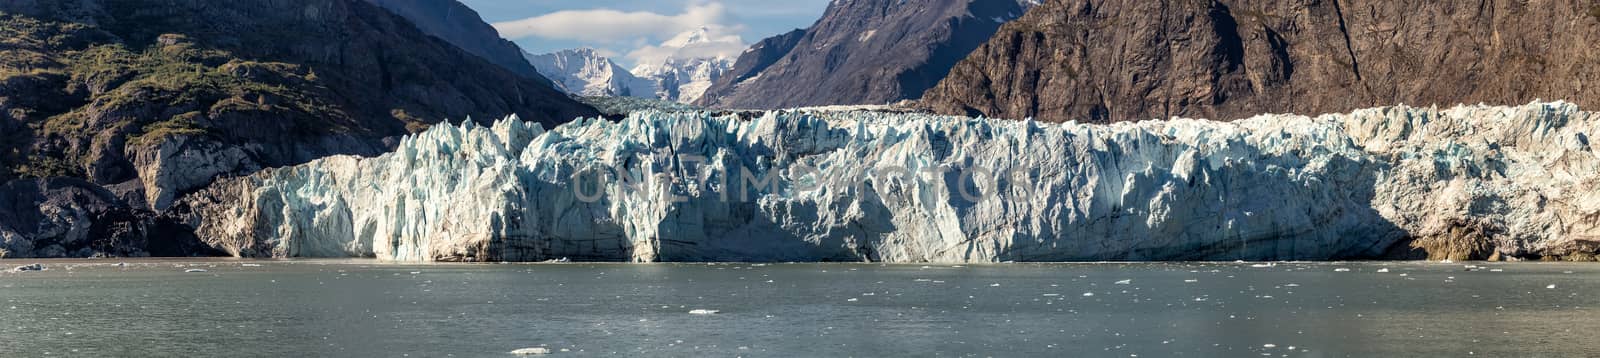 Panoramic view of Margerie glacier in Glacier Bay National Park and Preserve, Alaska, United States. Snowy mountain peaks and cloudy blue sky in the background.